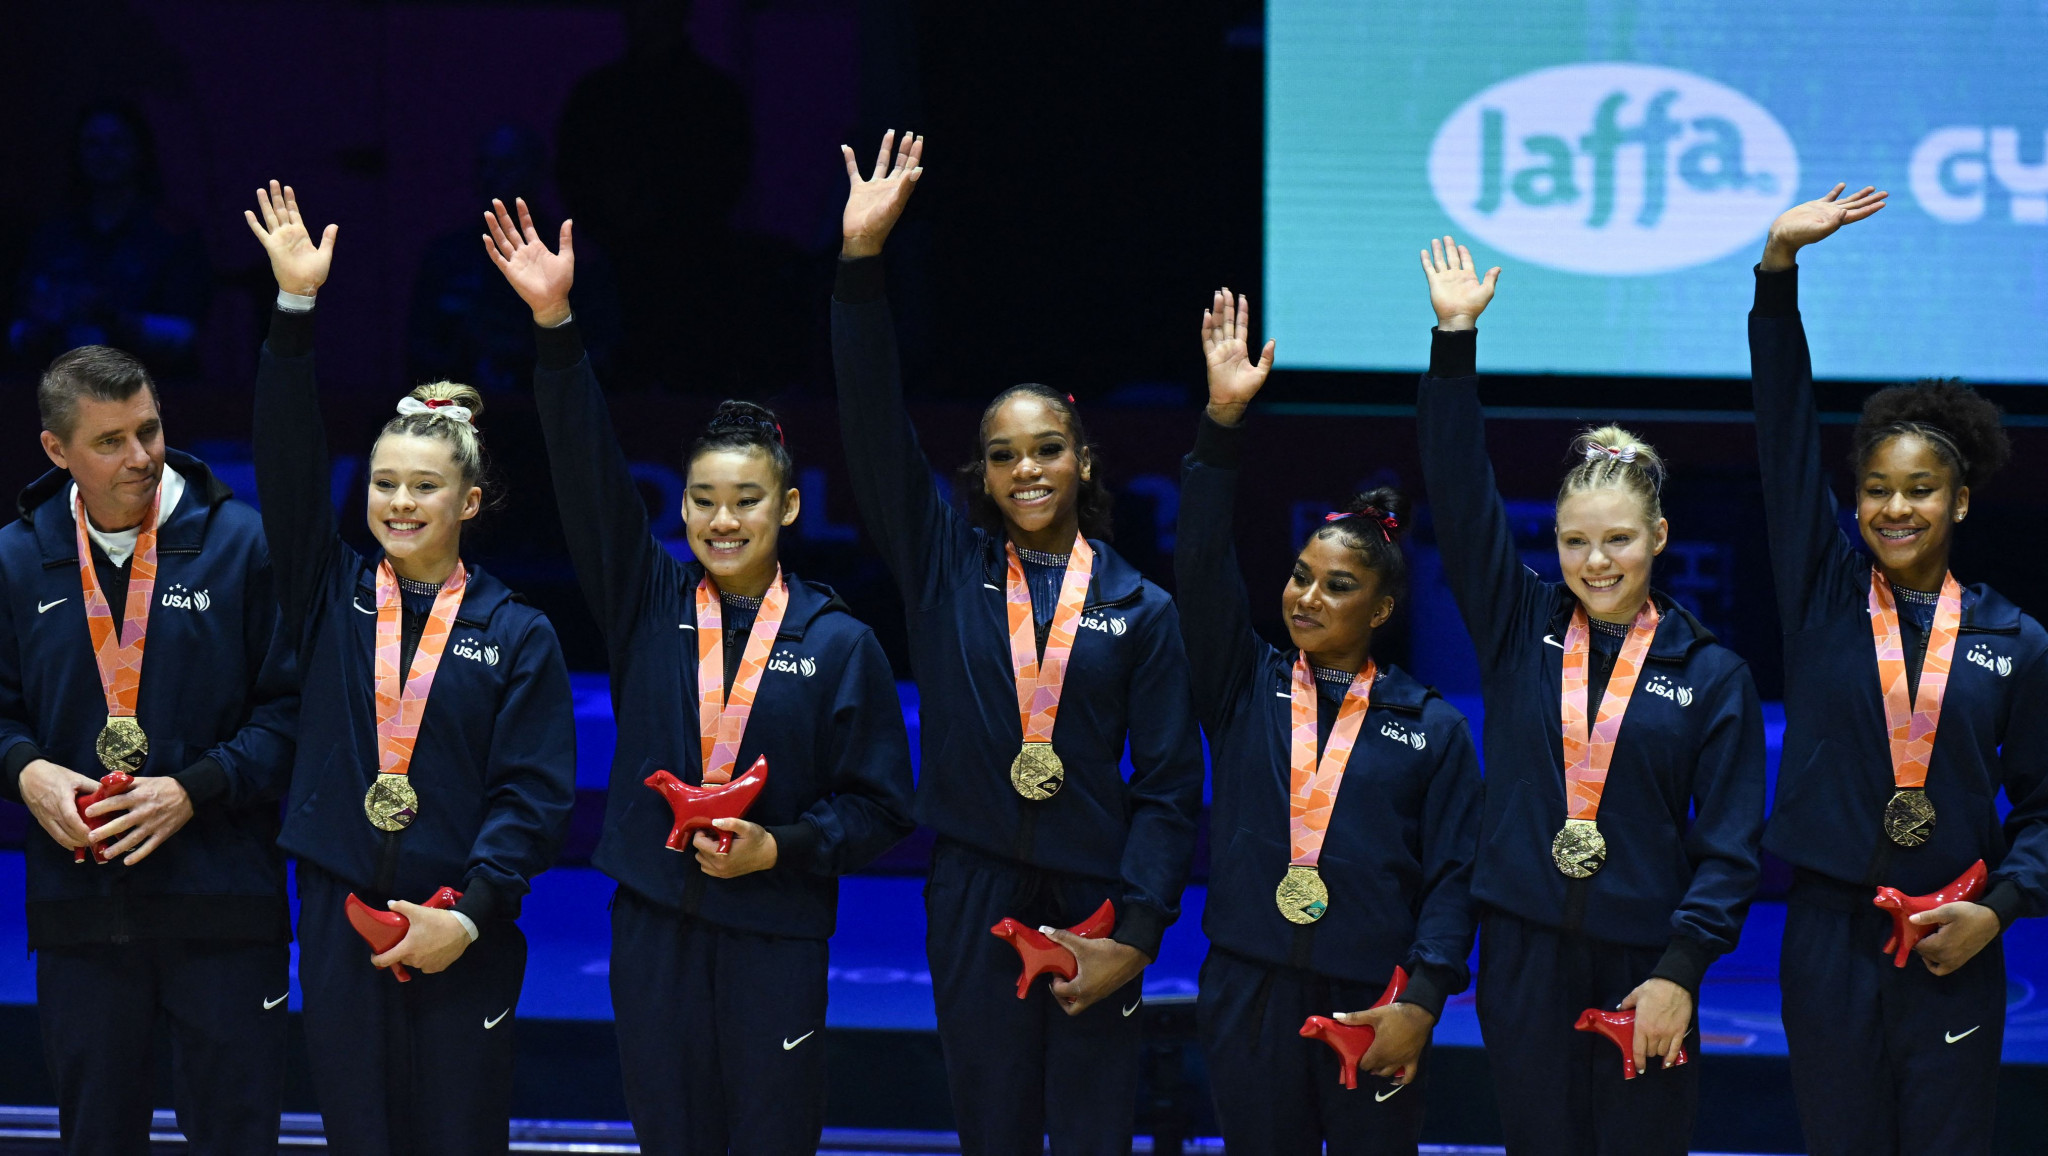 USA Gymnastics has undergone a rebrand including a new logo, and has sought to focus on "holistically developing the athlete" as part of the reforms ©Getty Images